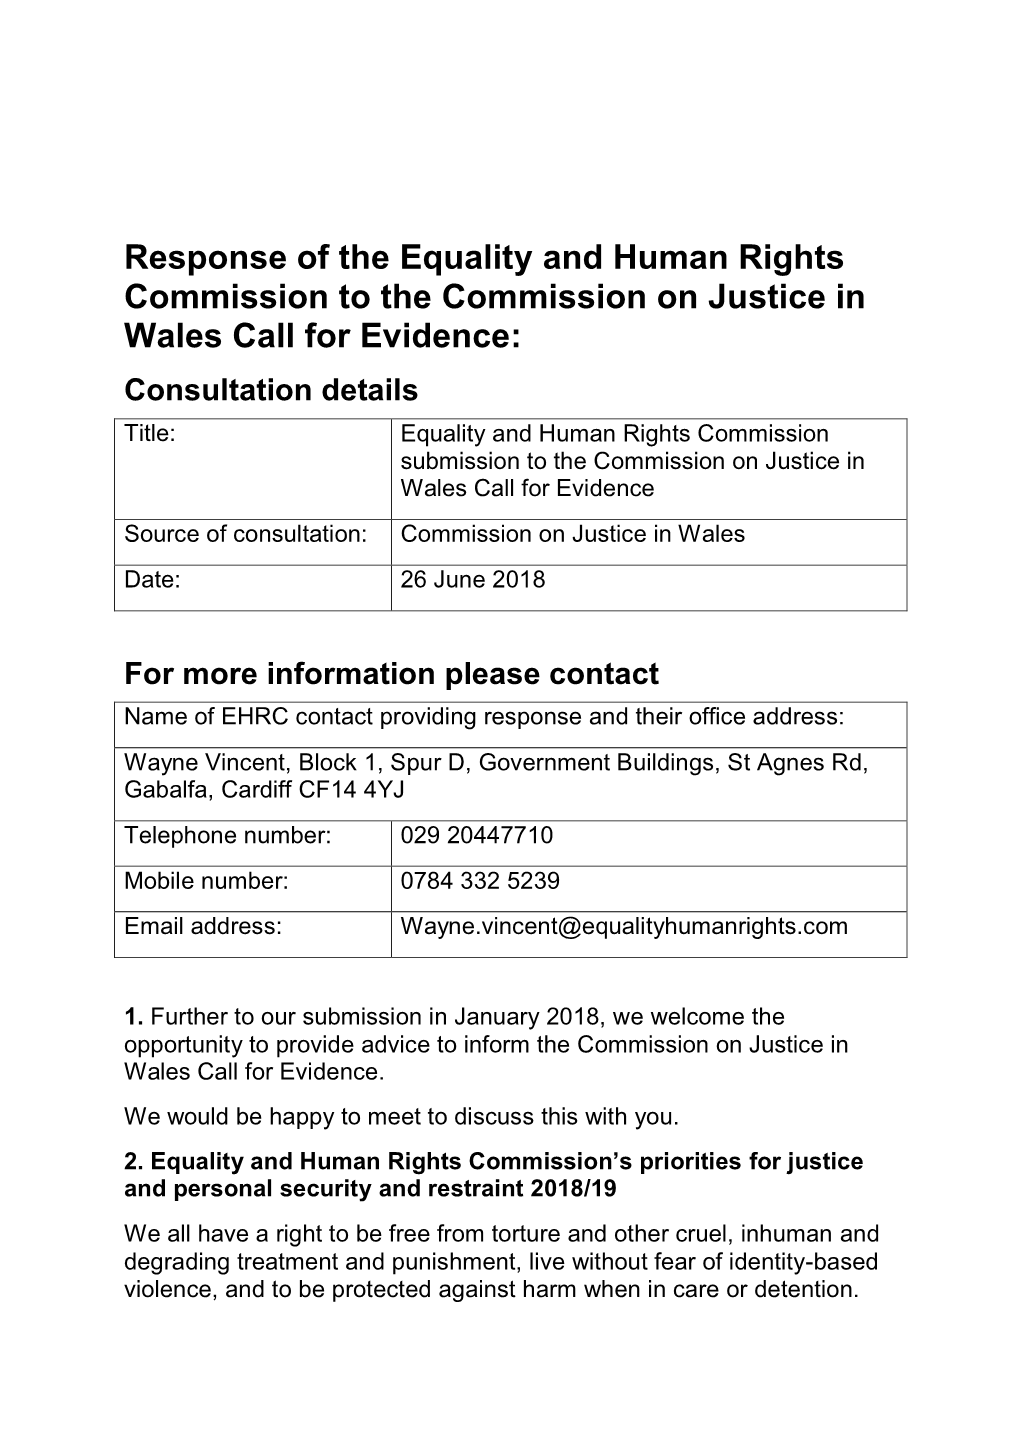 Response of the Equality and Human Rights Commission